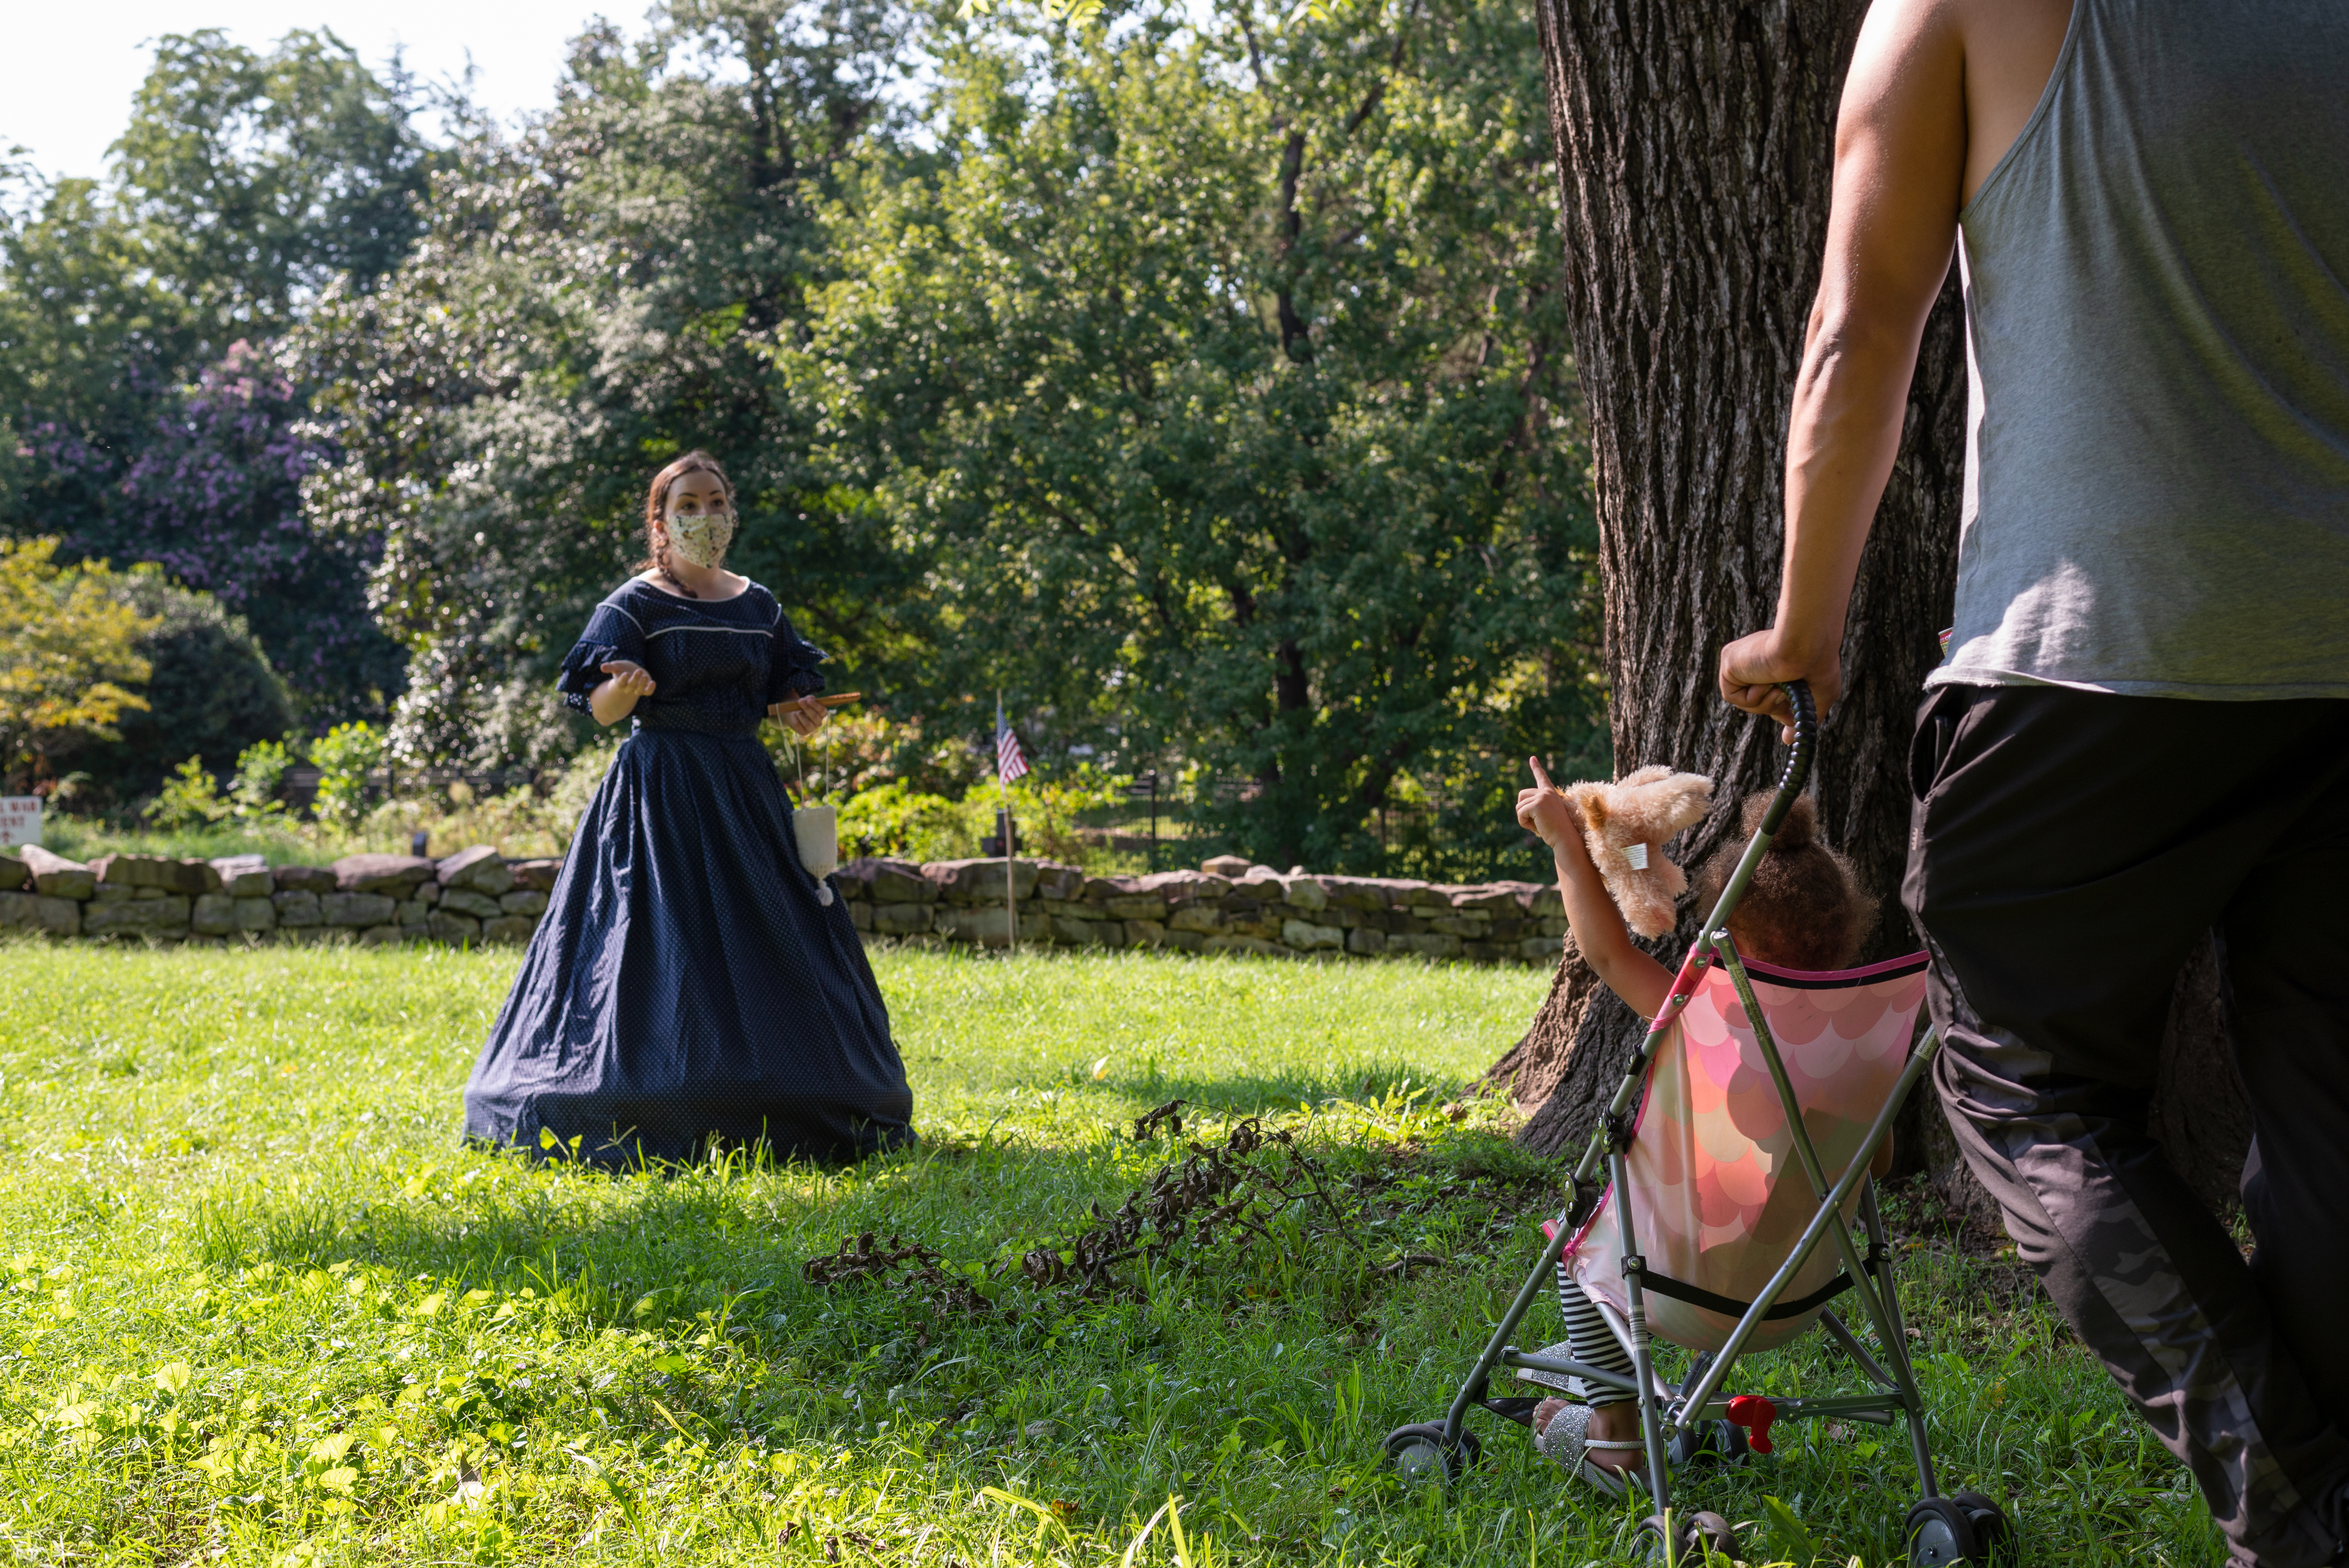 A woman in 1860s dress speaks to visitor as a child in a stroller raises her hand.